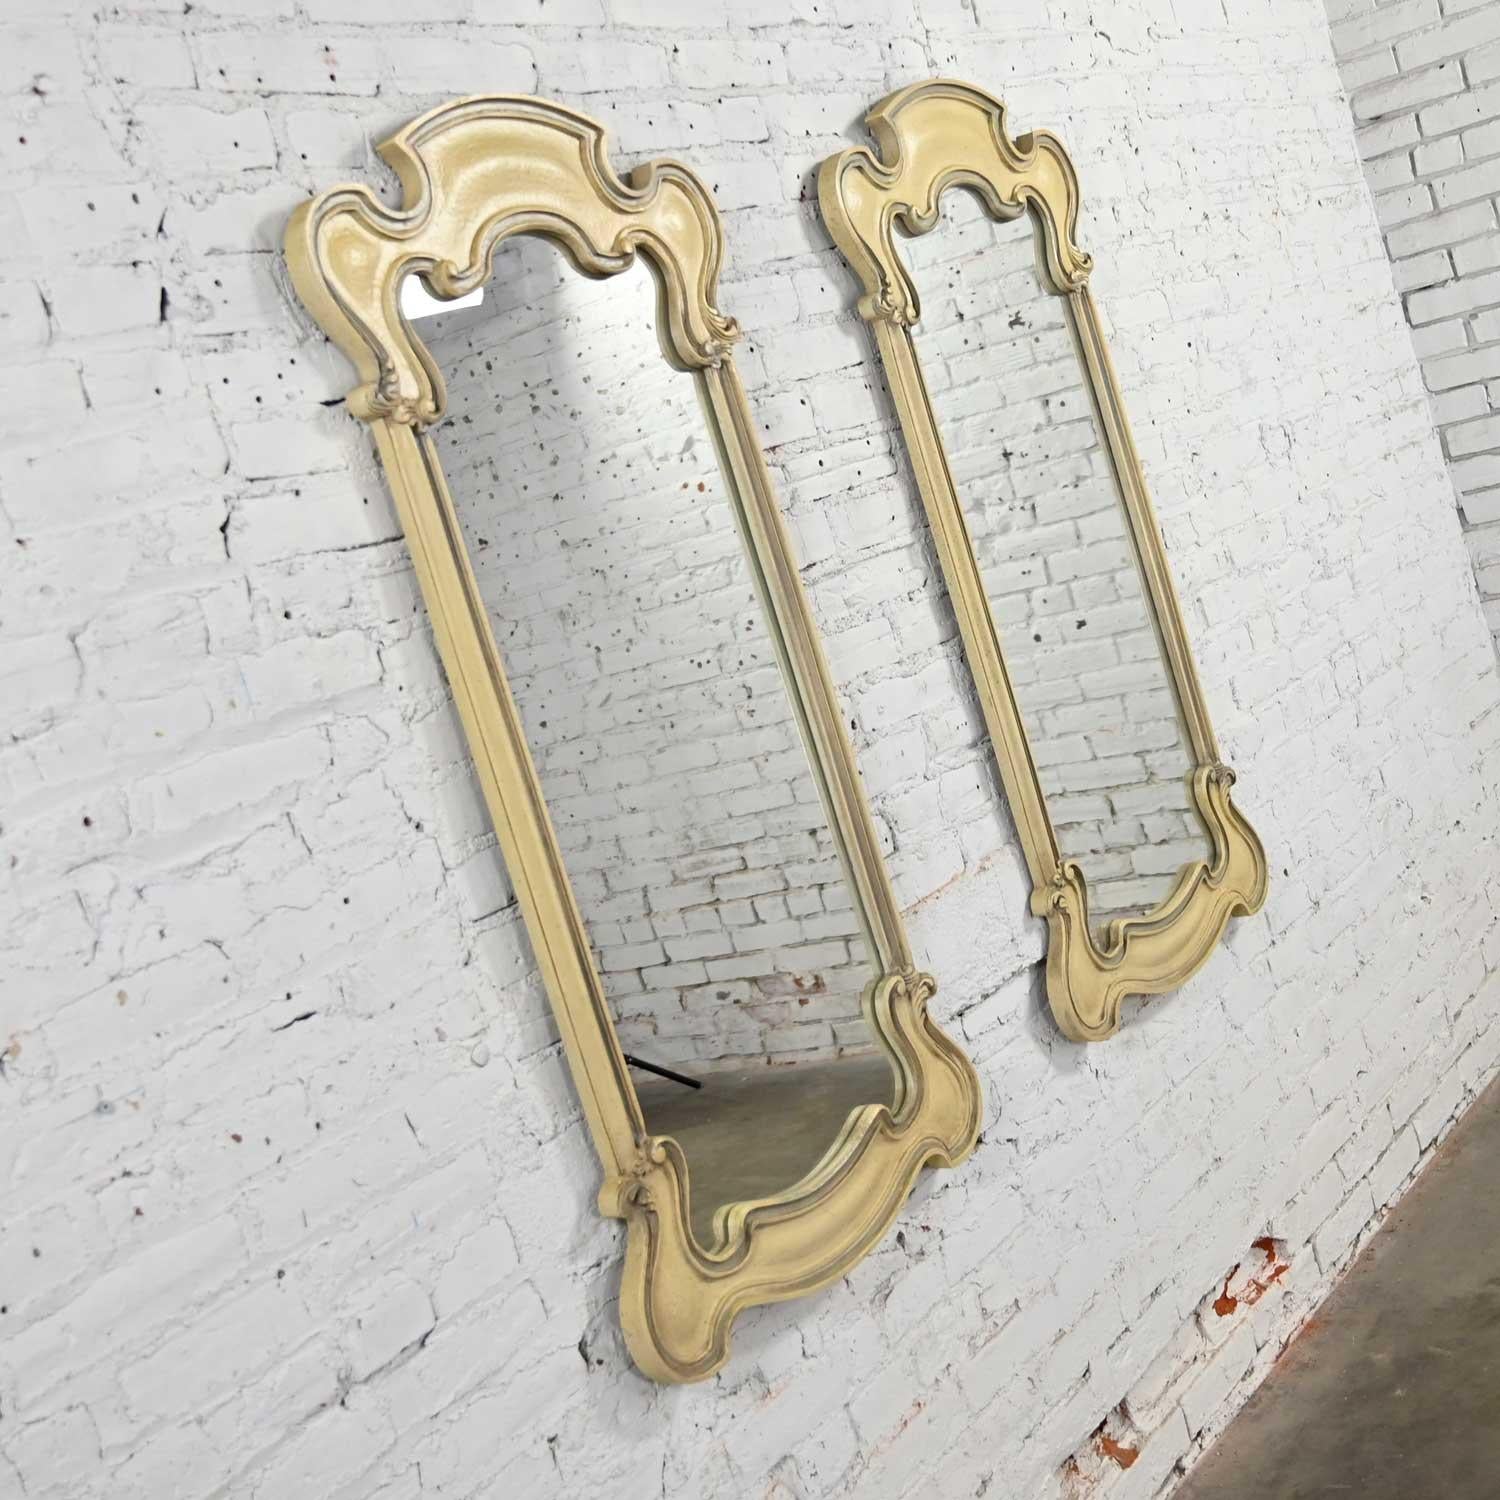 Fabulous French Provincial or Hollywood Regency style antiqued or cerused white pair of mirrors by the Prince Howard Furniture Company. Beautiful condition, keeping in mind that this is vintage and not new so will have signs of use and wear. When